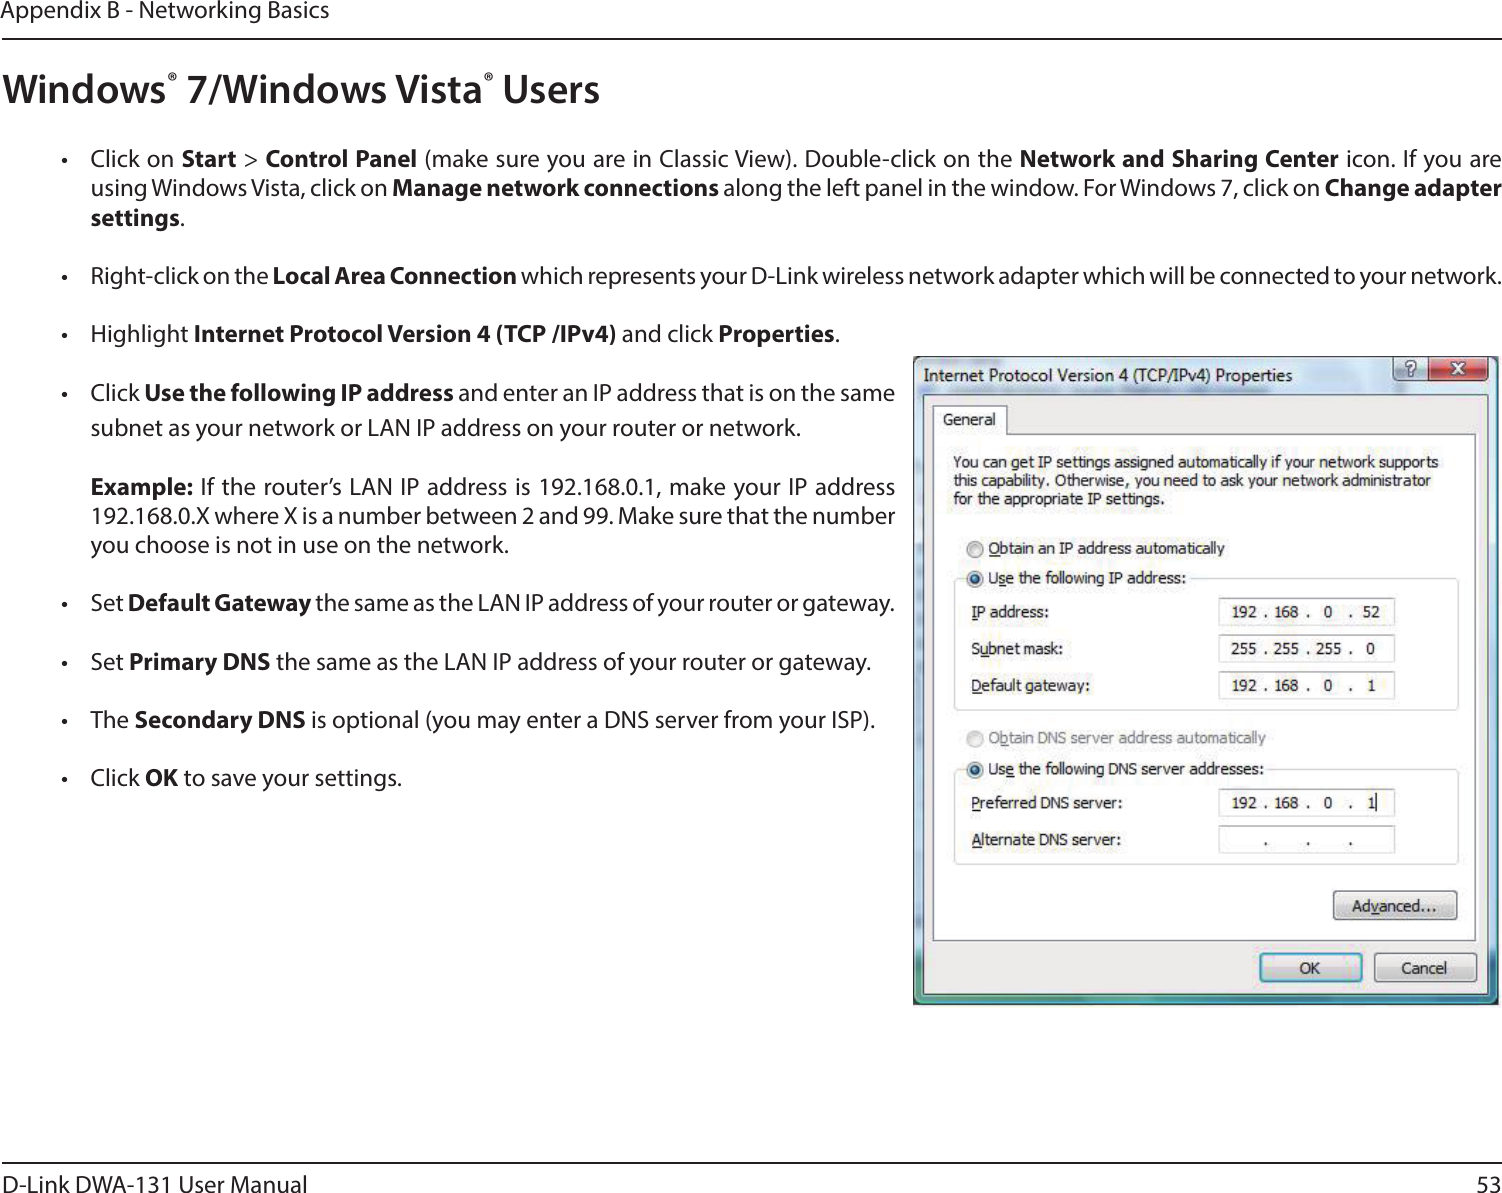 53D-Link DWA-131 User ManualAppendix B - Networking BasicsWindows® 7/Windows Vista® Users•  Click on Start &gt; Control Panel (make sure you are in Classic View). Double-click on the Network and Sharing Center icon. If you are using Windows Vista, click on Manage network connections along the left panel in the window. For Windows 7, click on Change adapter settings.•  Right-click on the Local Area Connection which represents your D-Link wireless network adapter which will be connected to your network.•  Highlight Internet Protocol Version 4 (TCP /IPv4) and click Properties.•  Click Use the following IP address and enter an IP address that is on the same subnet as your network or LAN IP address on your router or network. Example: If the router’s LAN IP address is 192.168.0.1, make your IP address 192.168.0.X where X is a number between 2 and 99. Make sure that the number you choose is not in use on the network. •  Set Default Gateway the same as the LAN IP address of your router or gateway.•  Set Primary DNS the same as the LAN IP address of your router or gateway. •  The Secondary DNS is optional (you may enter a DNS server from your ISP).•  Click OK to save your settings.